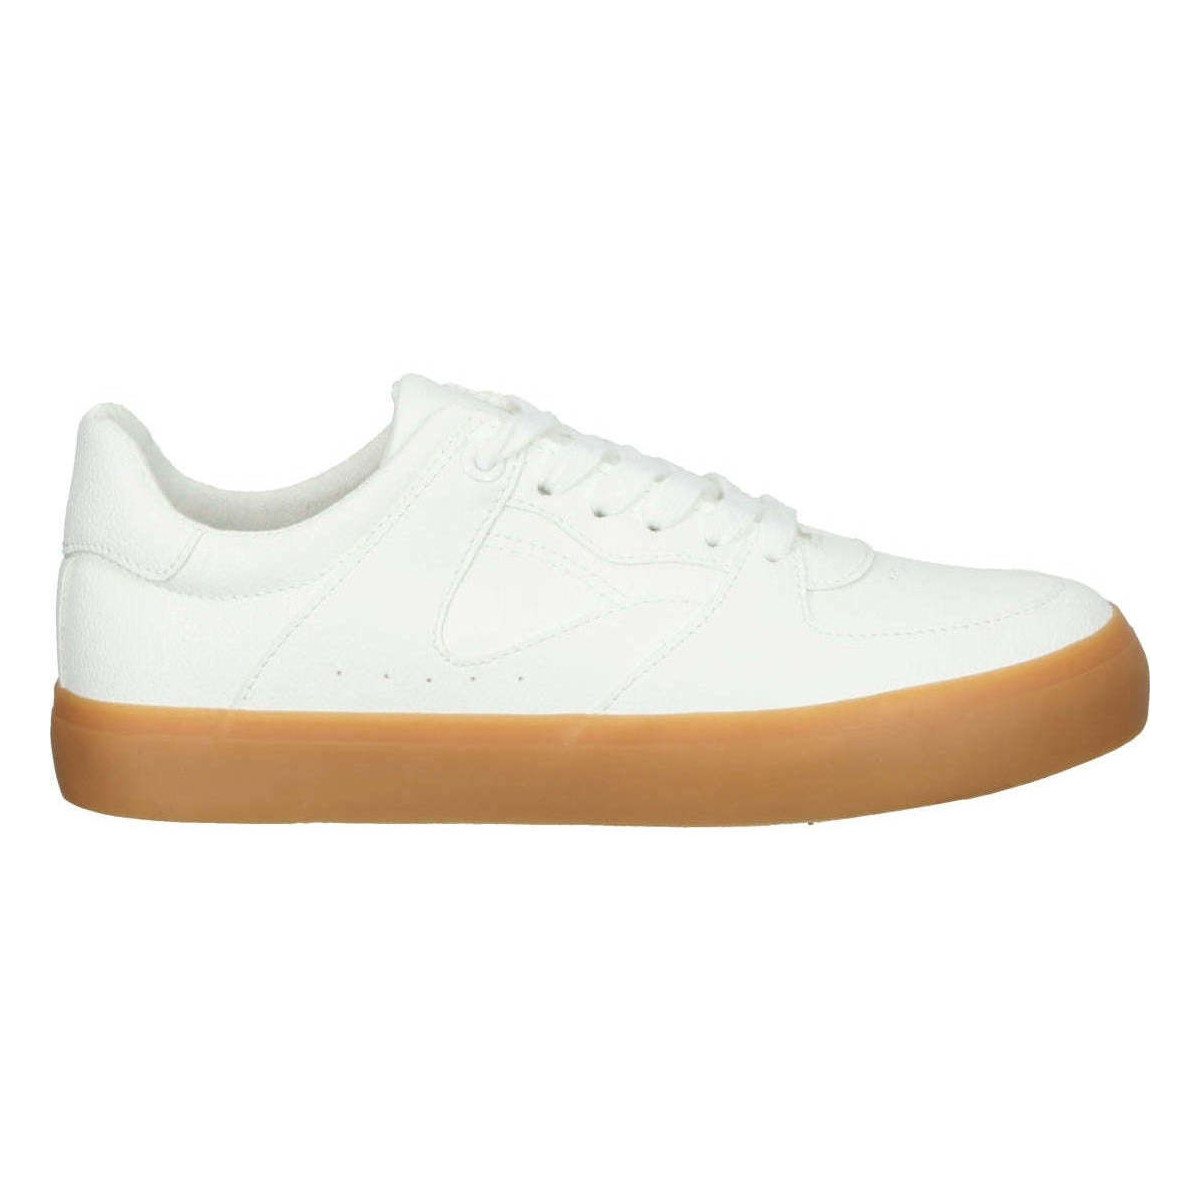 Chaussures Femme Ballerines / babies Young Spirit weiss casual closed shoes Blanc